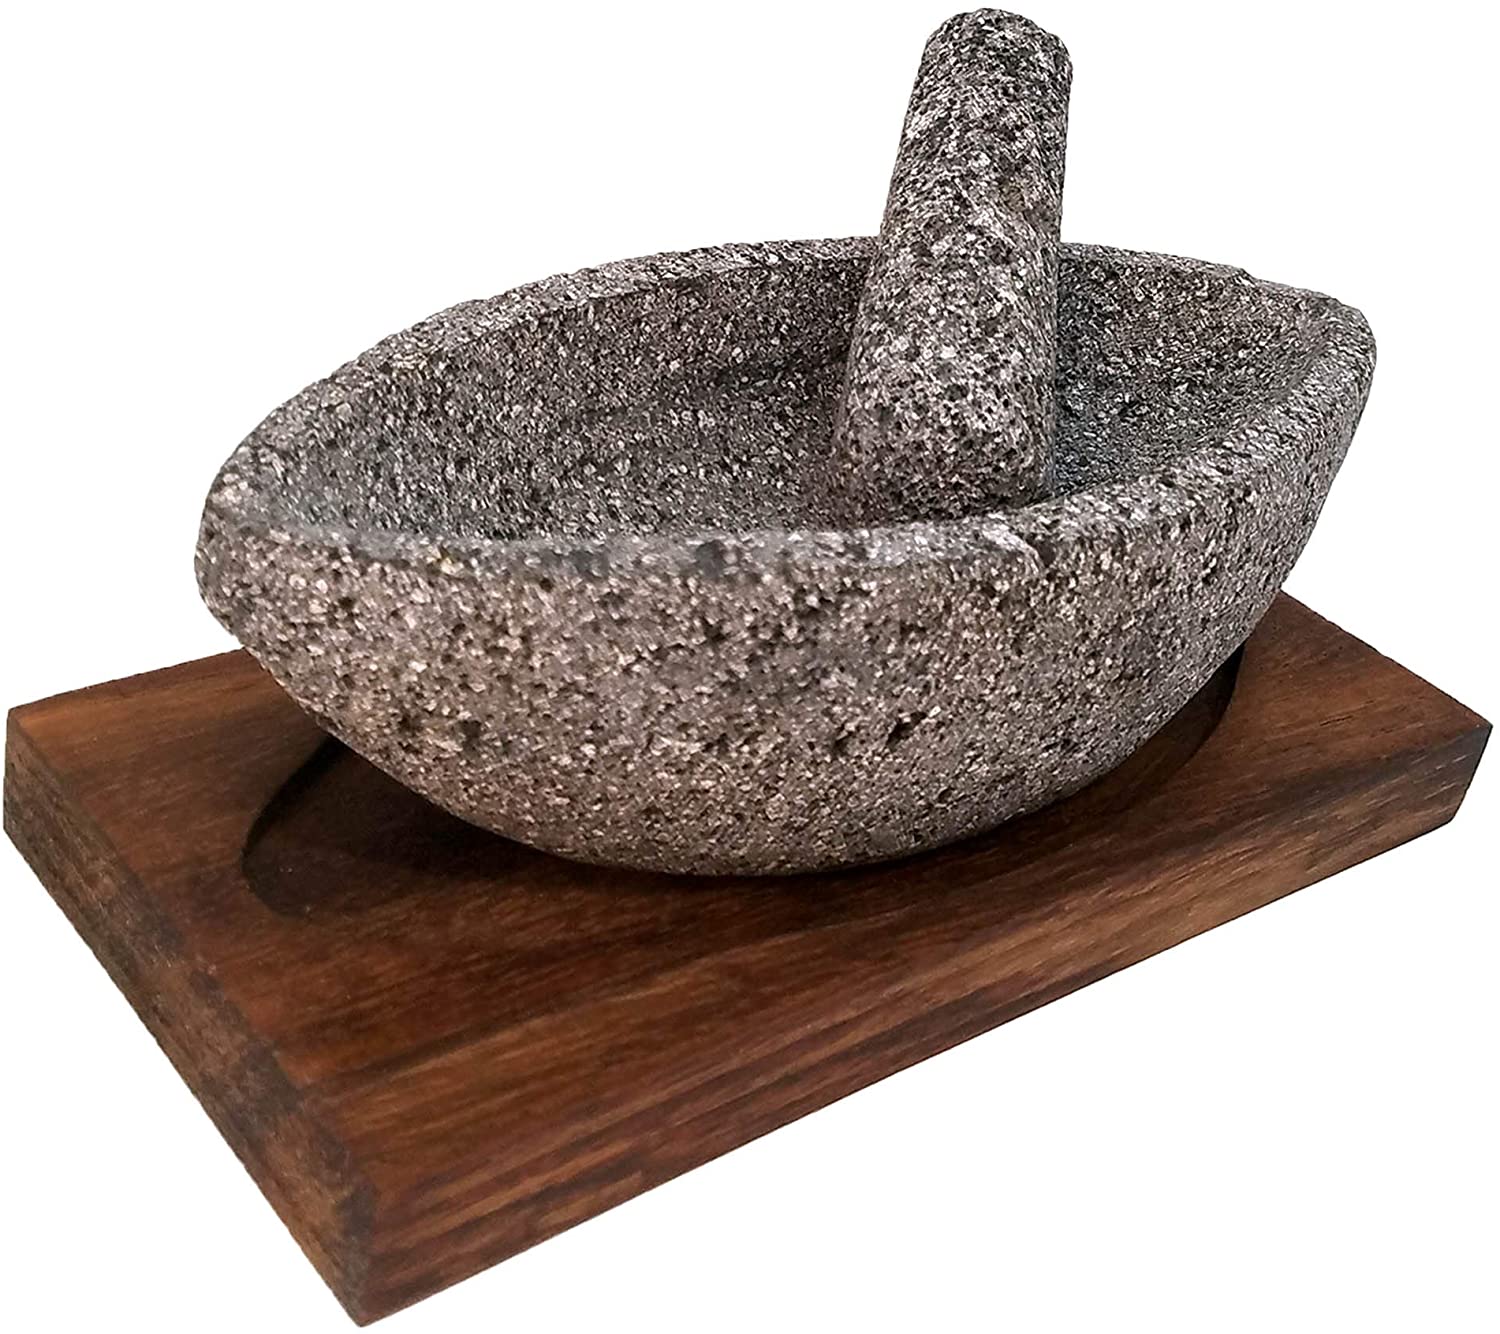 VOLCANIC ROCK PRODUCTS / Canoe Shaped Mortar and Pestle Set with Parota Wood Serving Board / Enhance your table setting with this original canoe-shaped mortar and pestle set with included wood serving board, as it is eye-catching, yet functional.